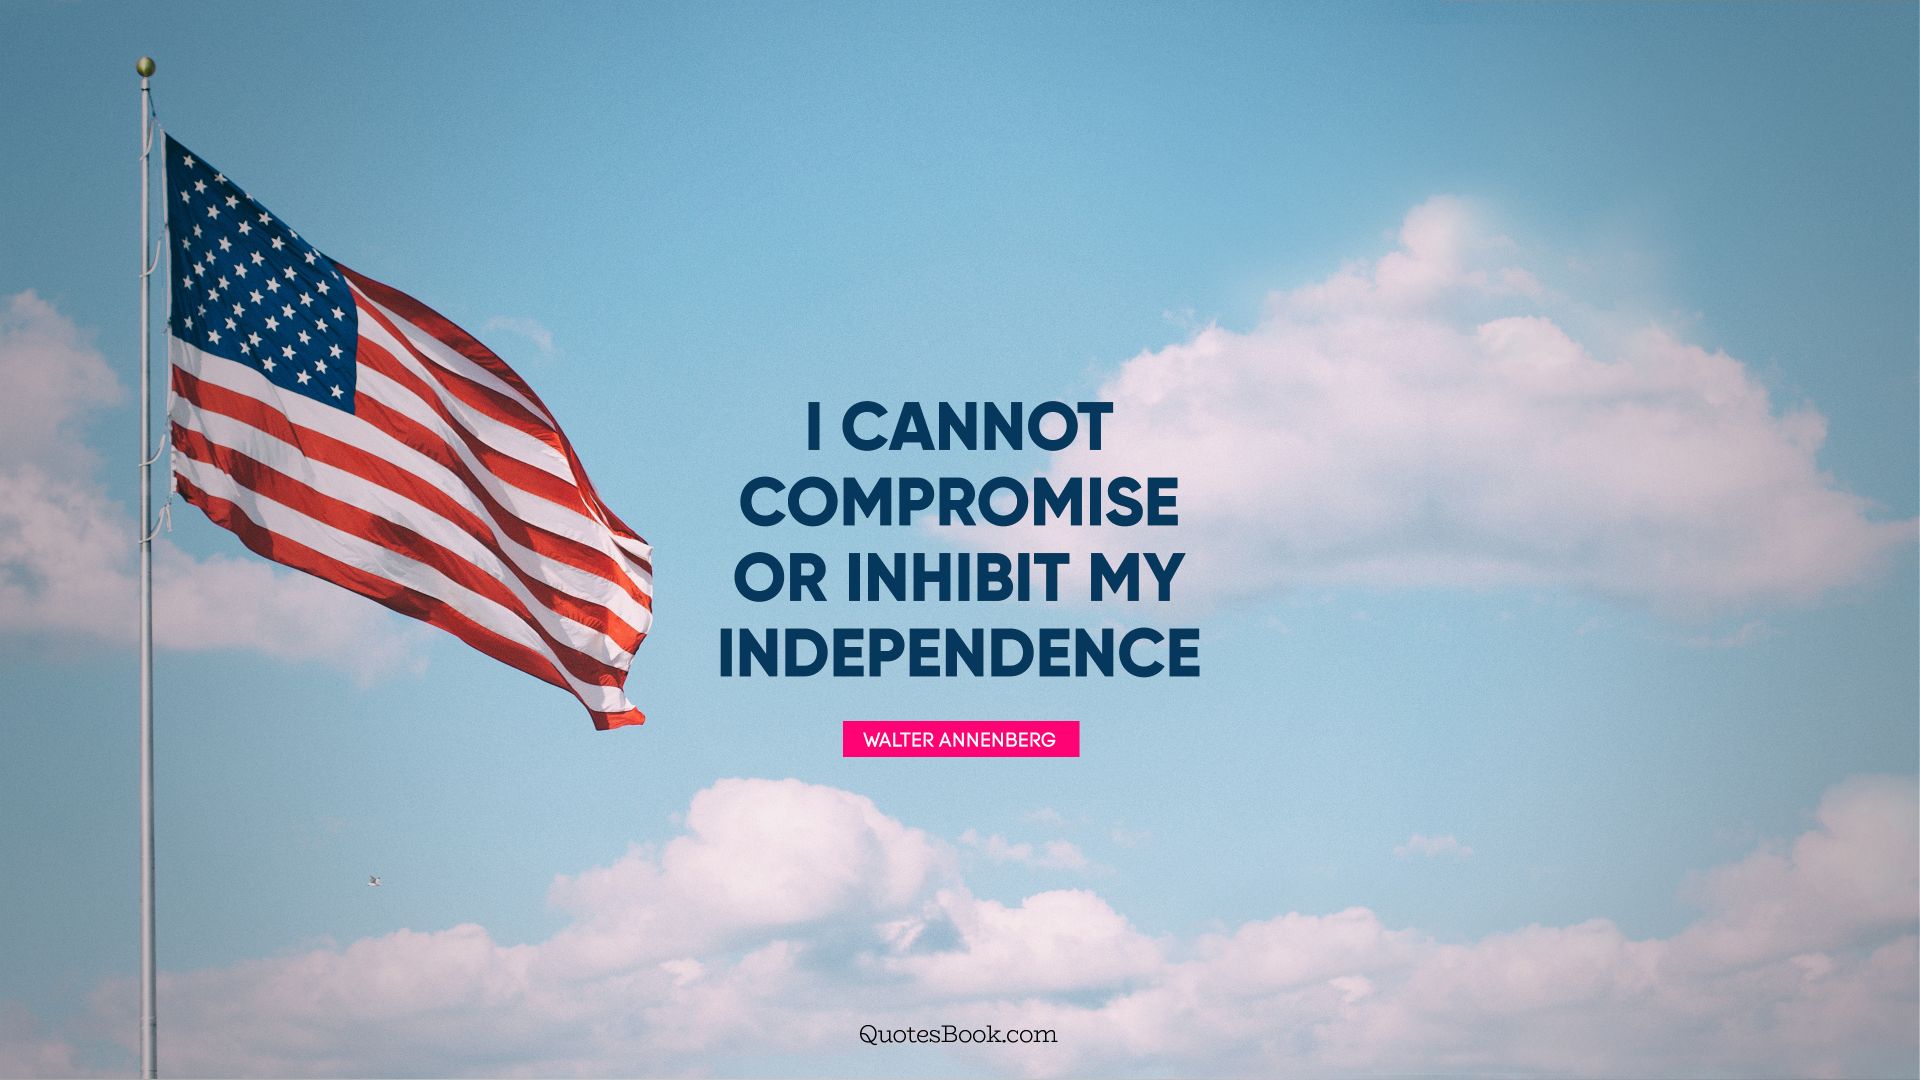 I cannot compromise or inhibit my independence. - Quote by Walter Annenberg